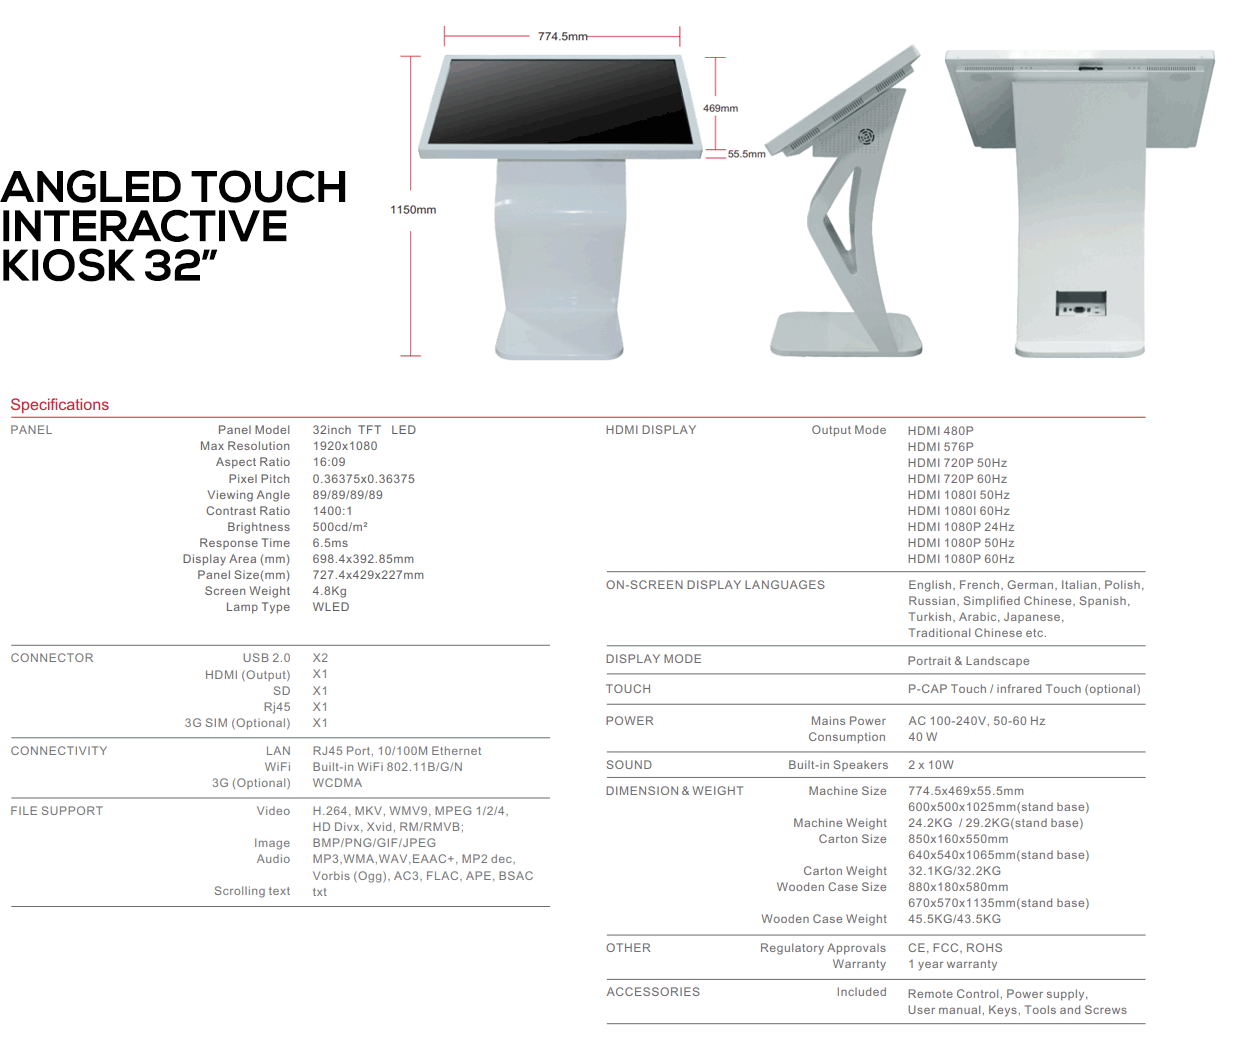 ANGLED-TOUCH-32-specs